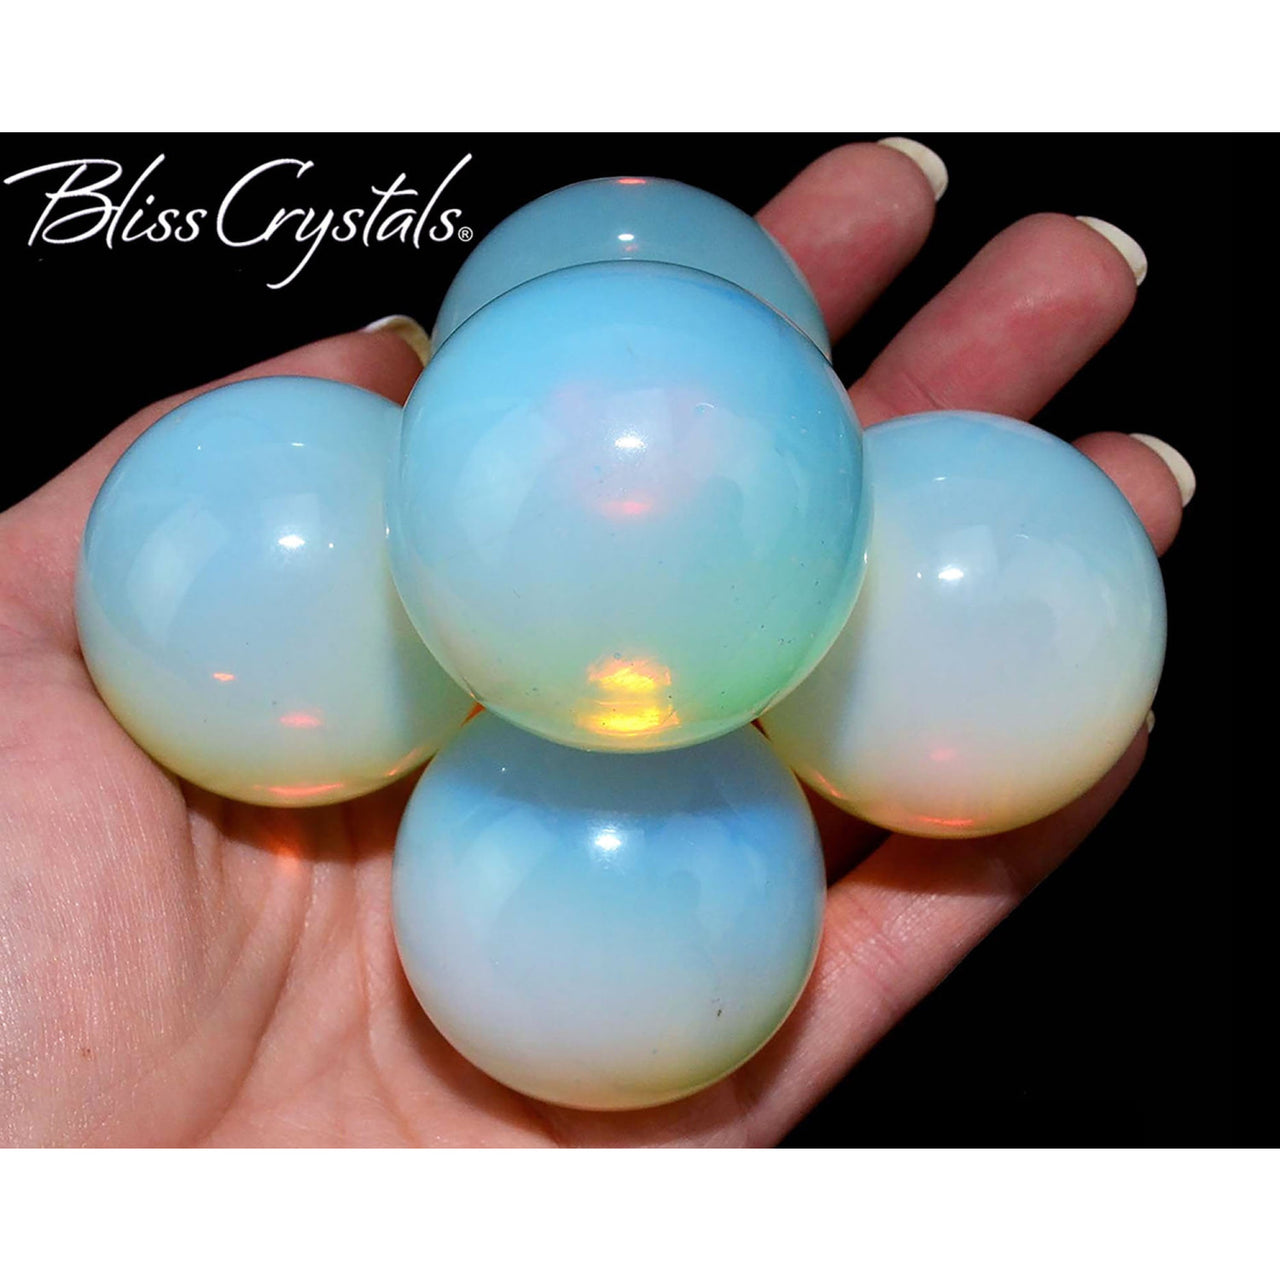 1 Large Opalite Polished Sphere + Stand Healing Crystal and 